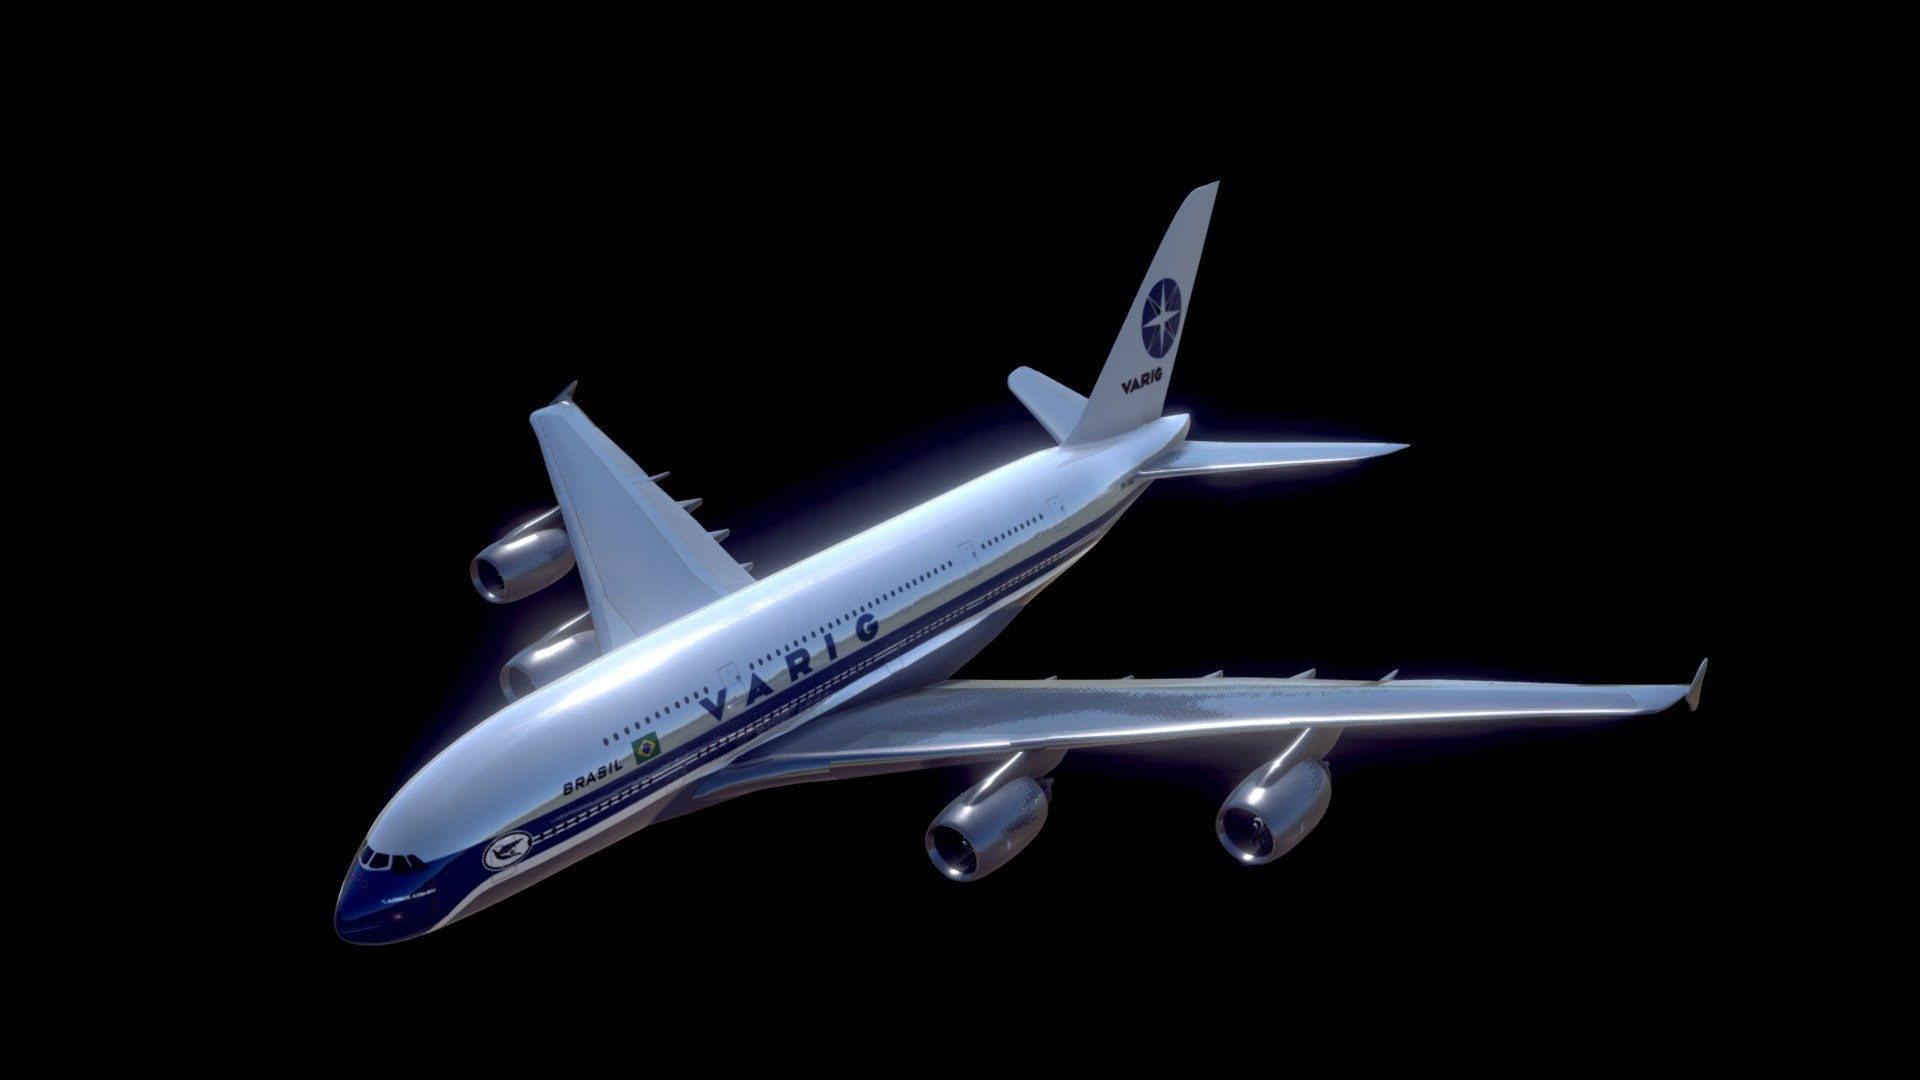 An Airbus A380 painted in a Varig livery, a major brazilian airline that operated from 1927 to 2010.

I like the livery they used in the 80s and decided to apply it to a newer aircraft model to see how it would look like. Turned out to be pretty good!

Software used: 3DS Max and Substance Painter - Varig A380 - Buy Royalty Free 3D model by Igor Harmendani (@igorharmendani) 3d model